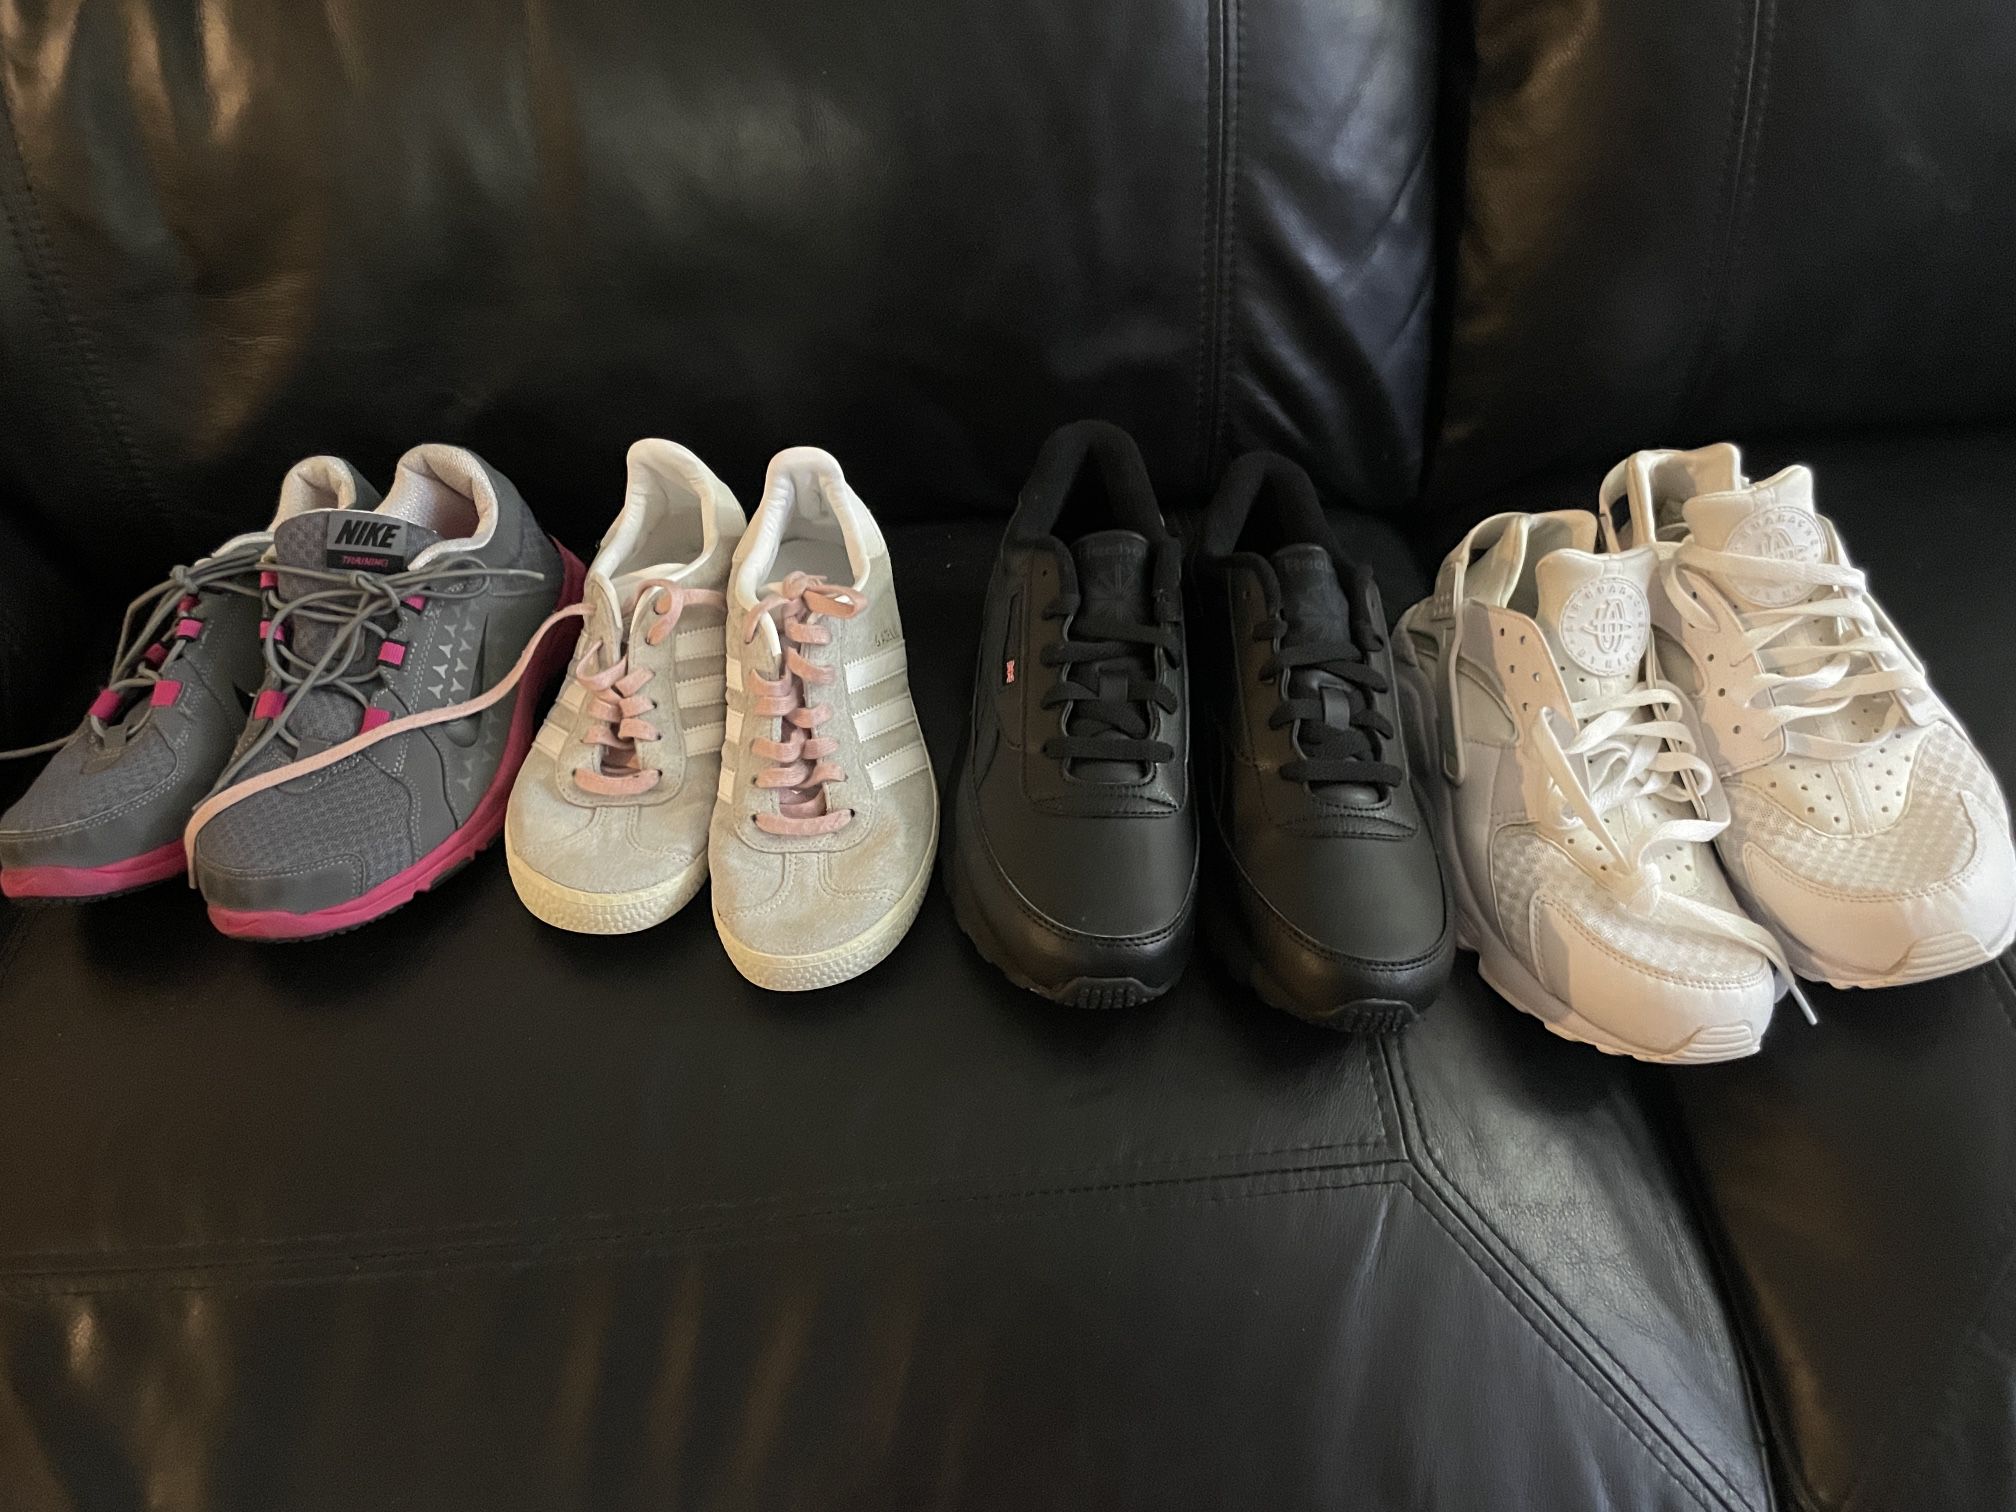 4 Pair Of Sport Sneakers 3 Pair For Women One Pair For Men   Nike Adidas And Reebok 